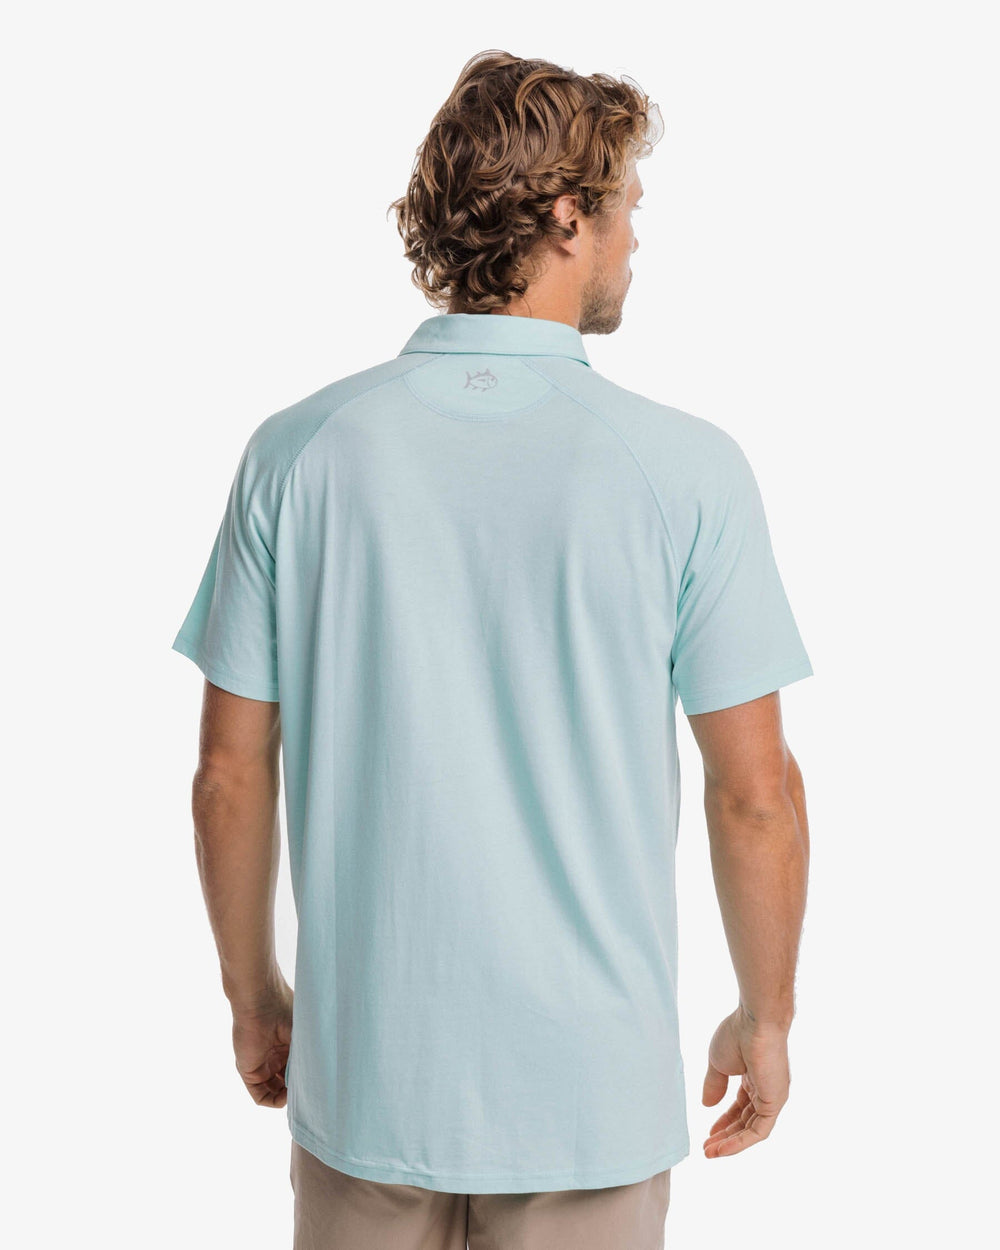 The back view of the Southern Tide Racquet Polo Shirt by Southern Tide - Baltic Teal